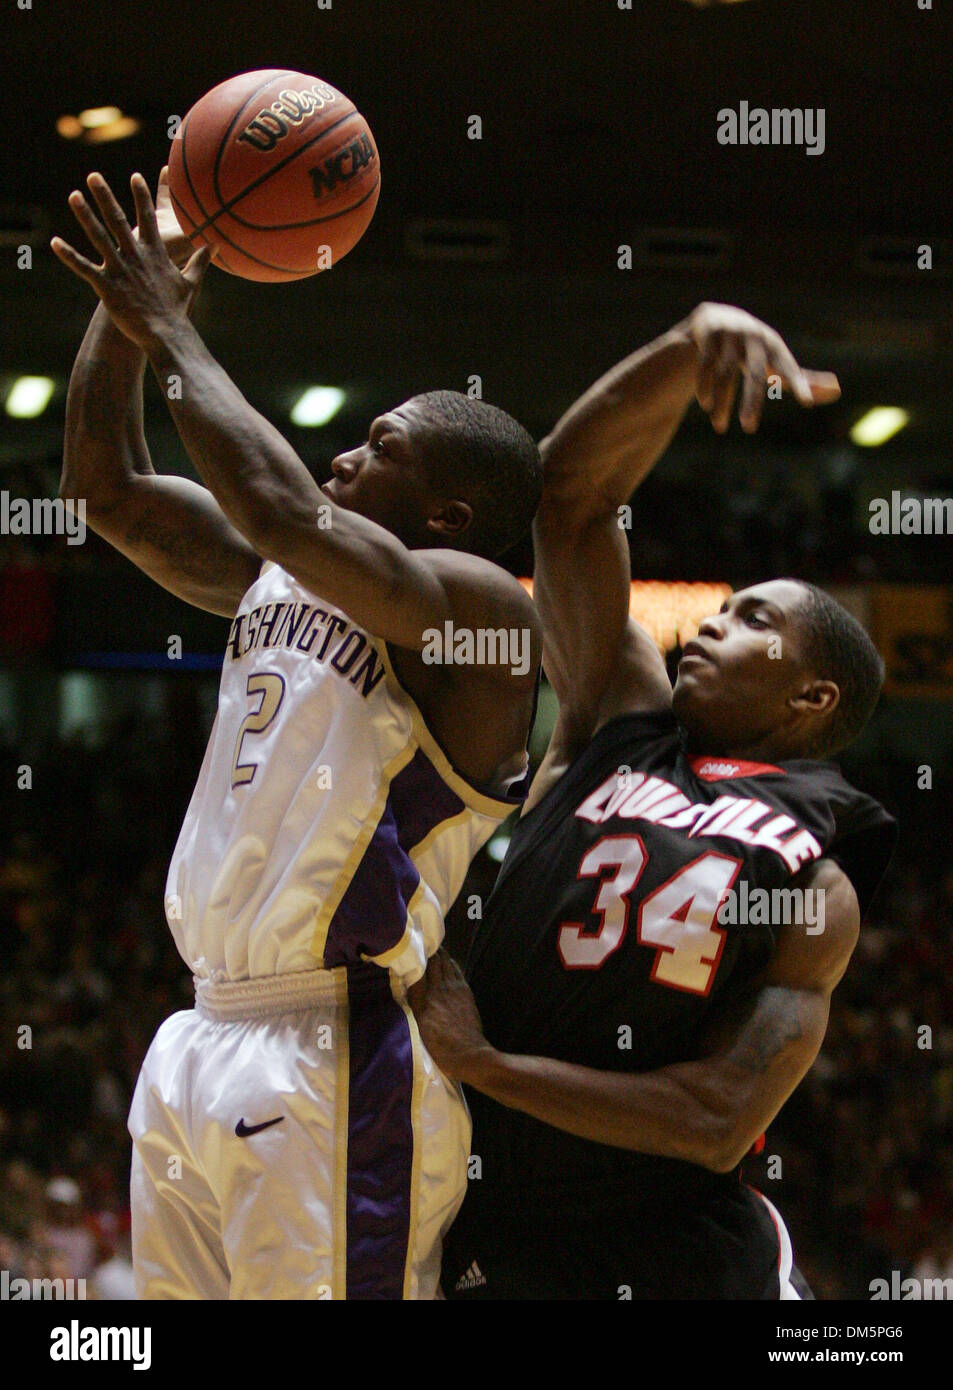 Mar 24, 2005; Albuquerque, NM, USA; University of Washington's Nate Robinson (02) gets fouled by University of Louisville's Larry O'Bannon in the second half of their NCAA Albuquerque Regional semifinal game in Albuquerque, New Mexico on Thursday, Mar 24, 2005. Stock Photo